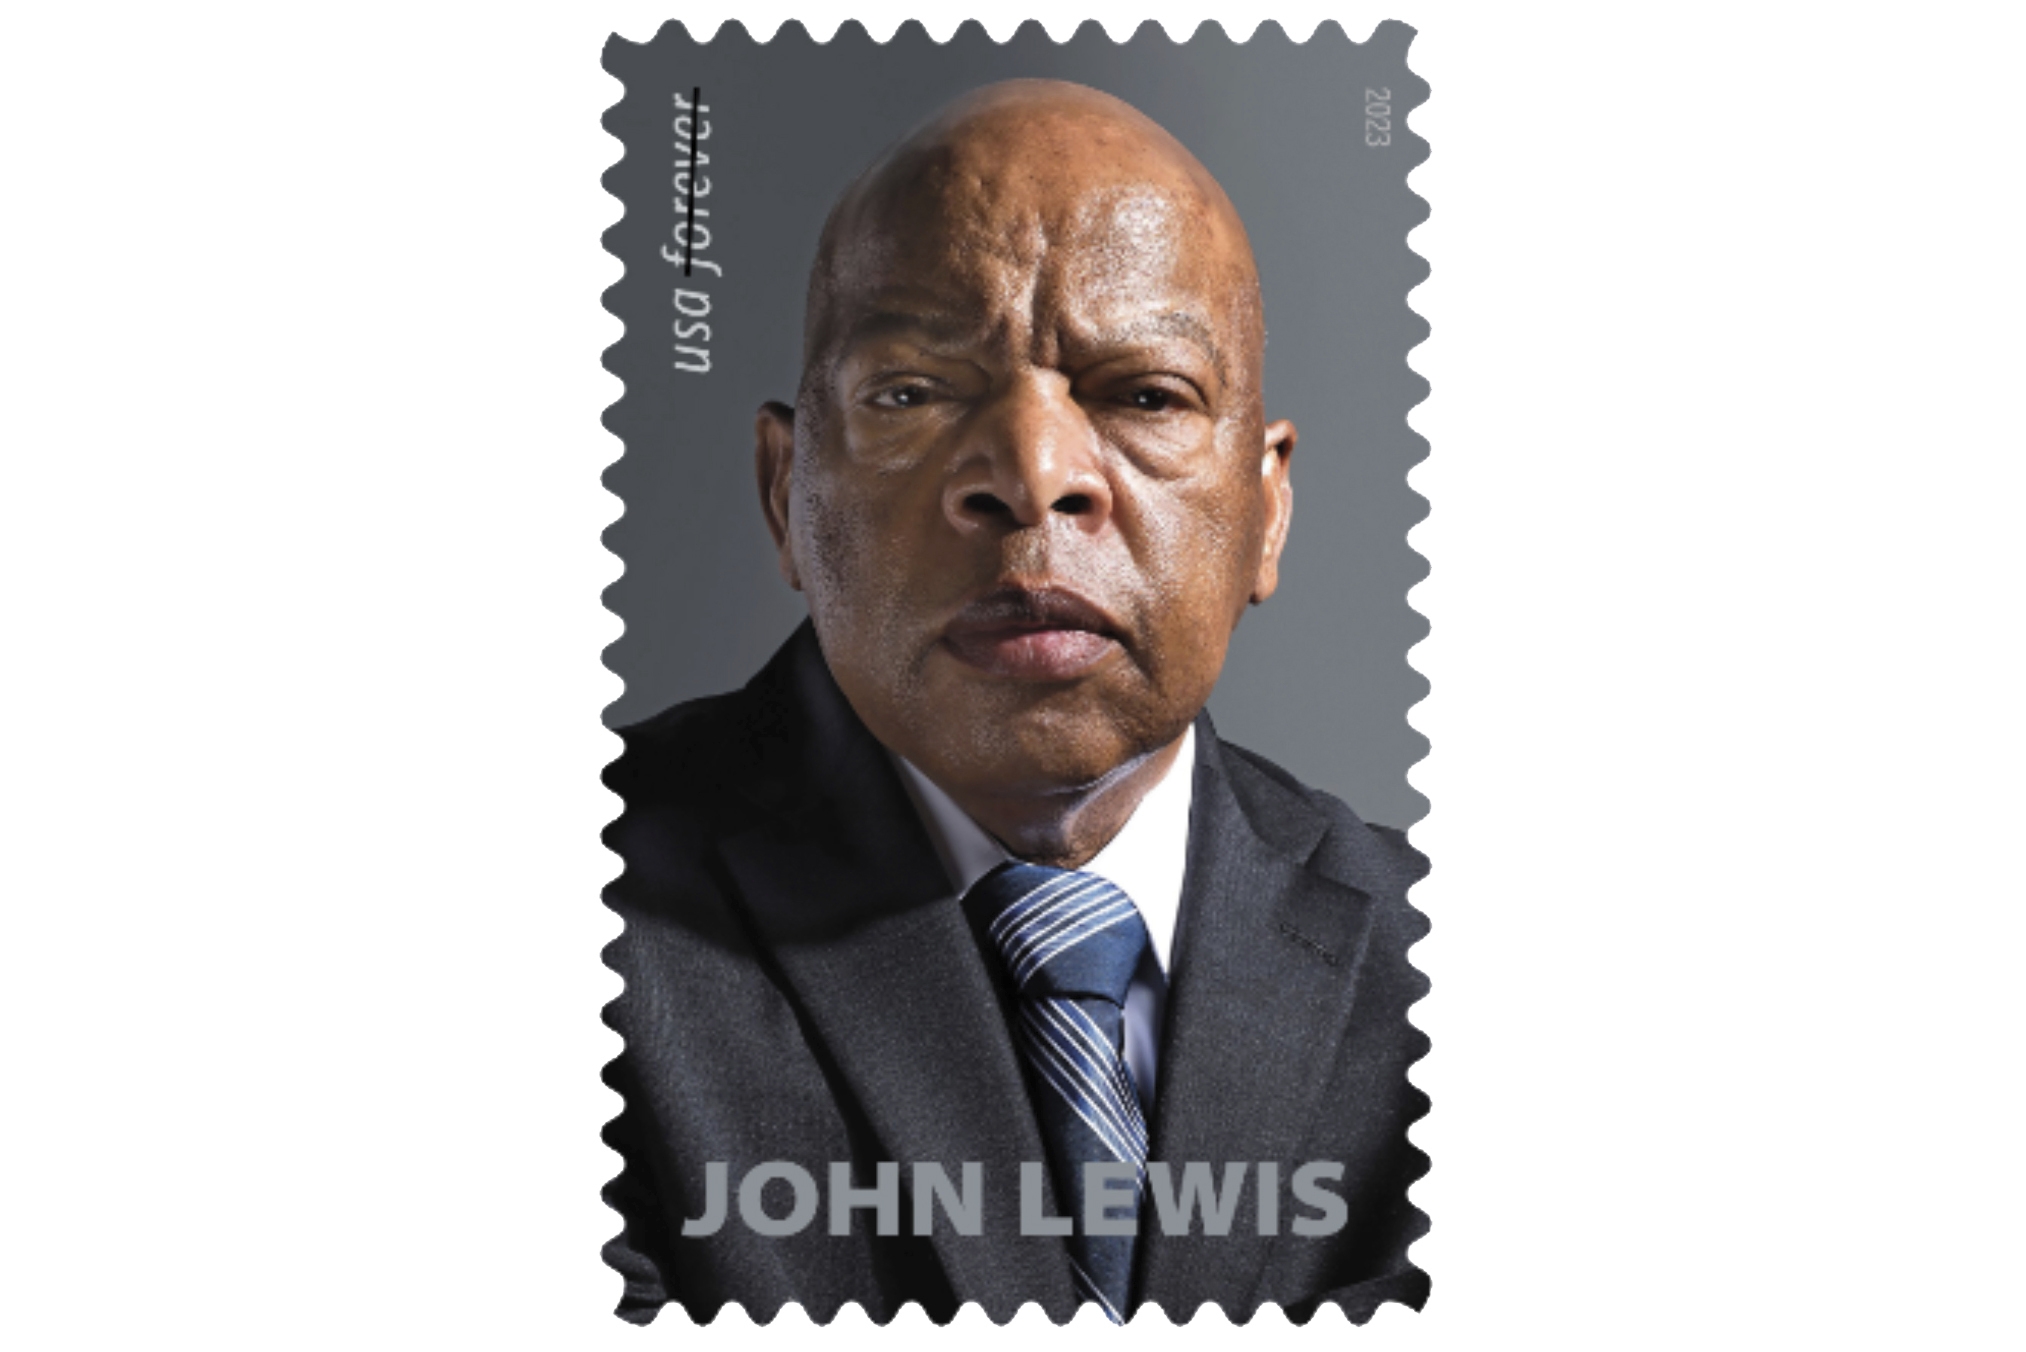 US postage stamp to honor civil rights icon John Lewis WTOP News